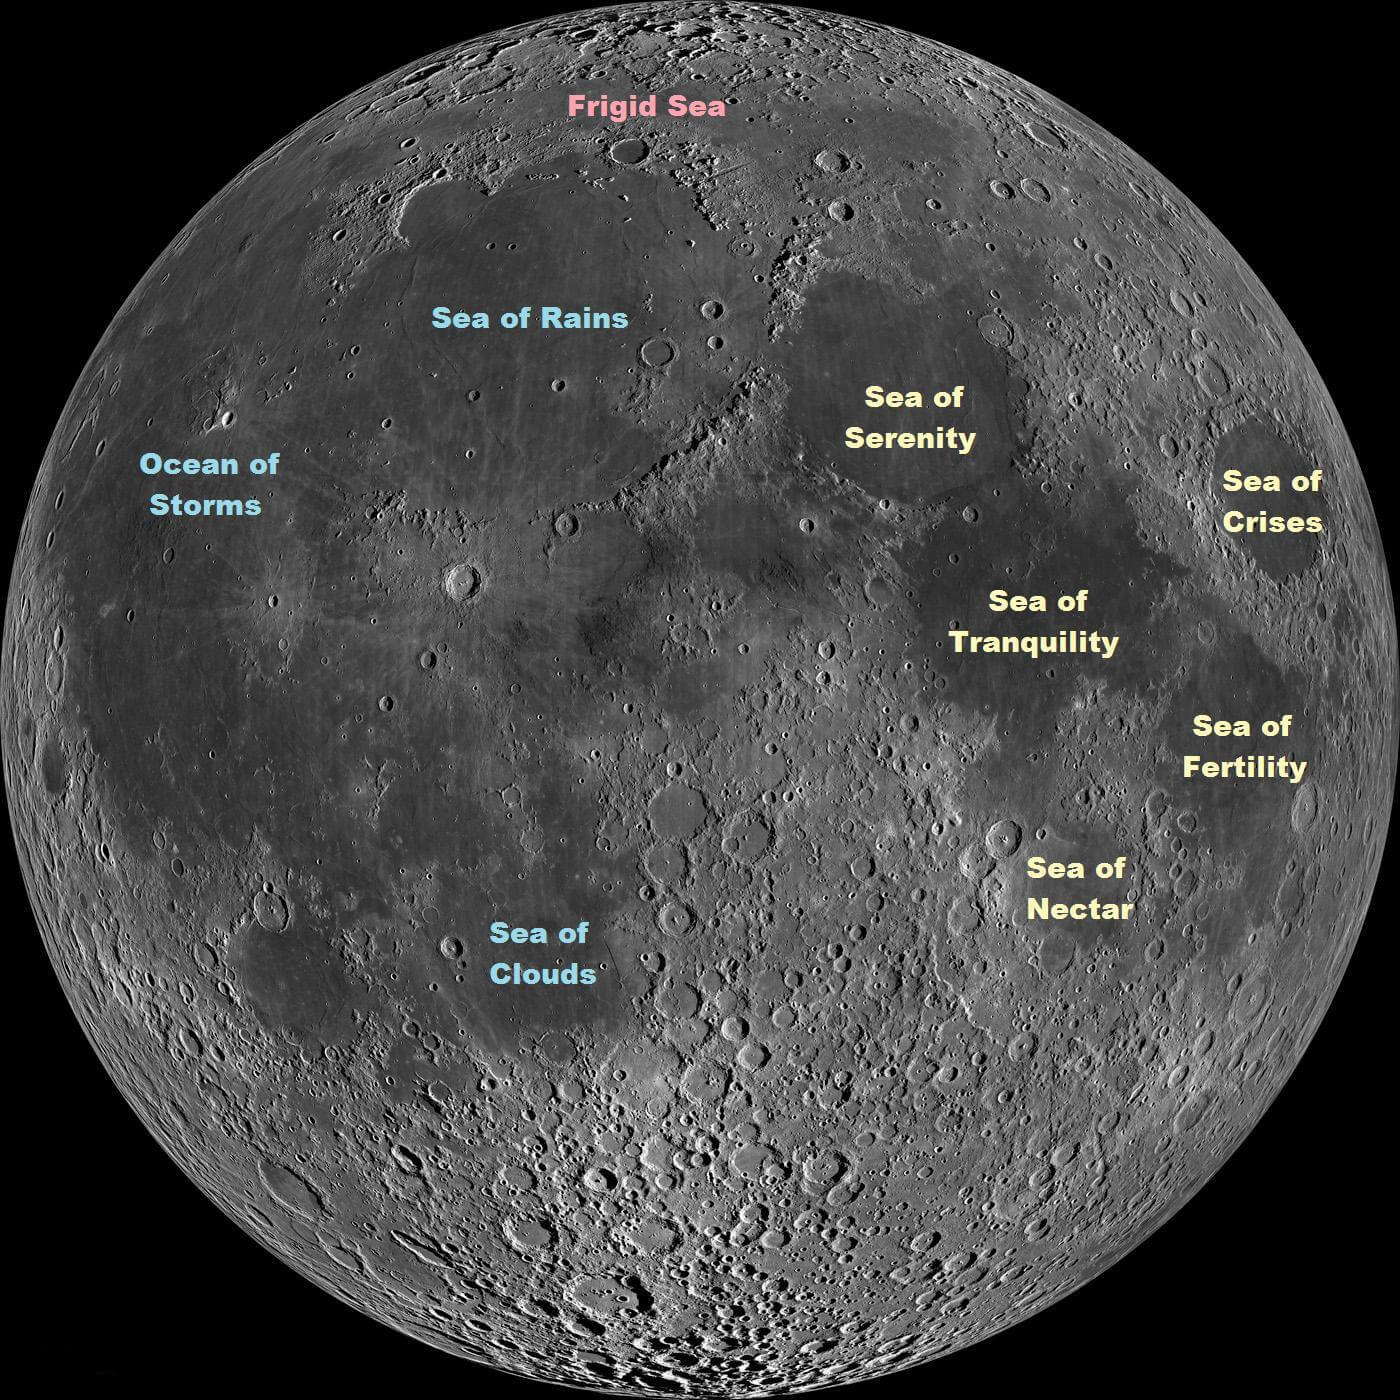 Features on the moon (image courtesy www.stardate.org)